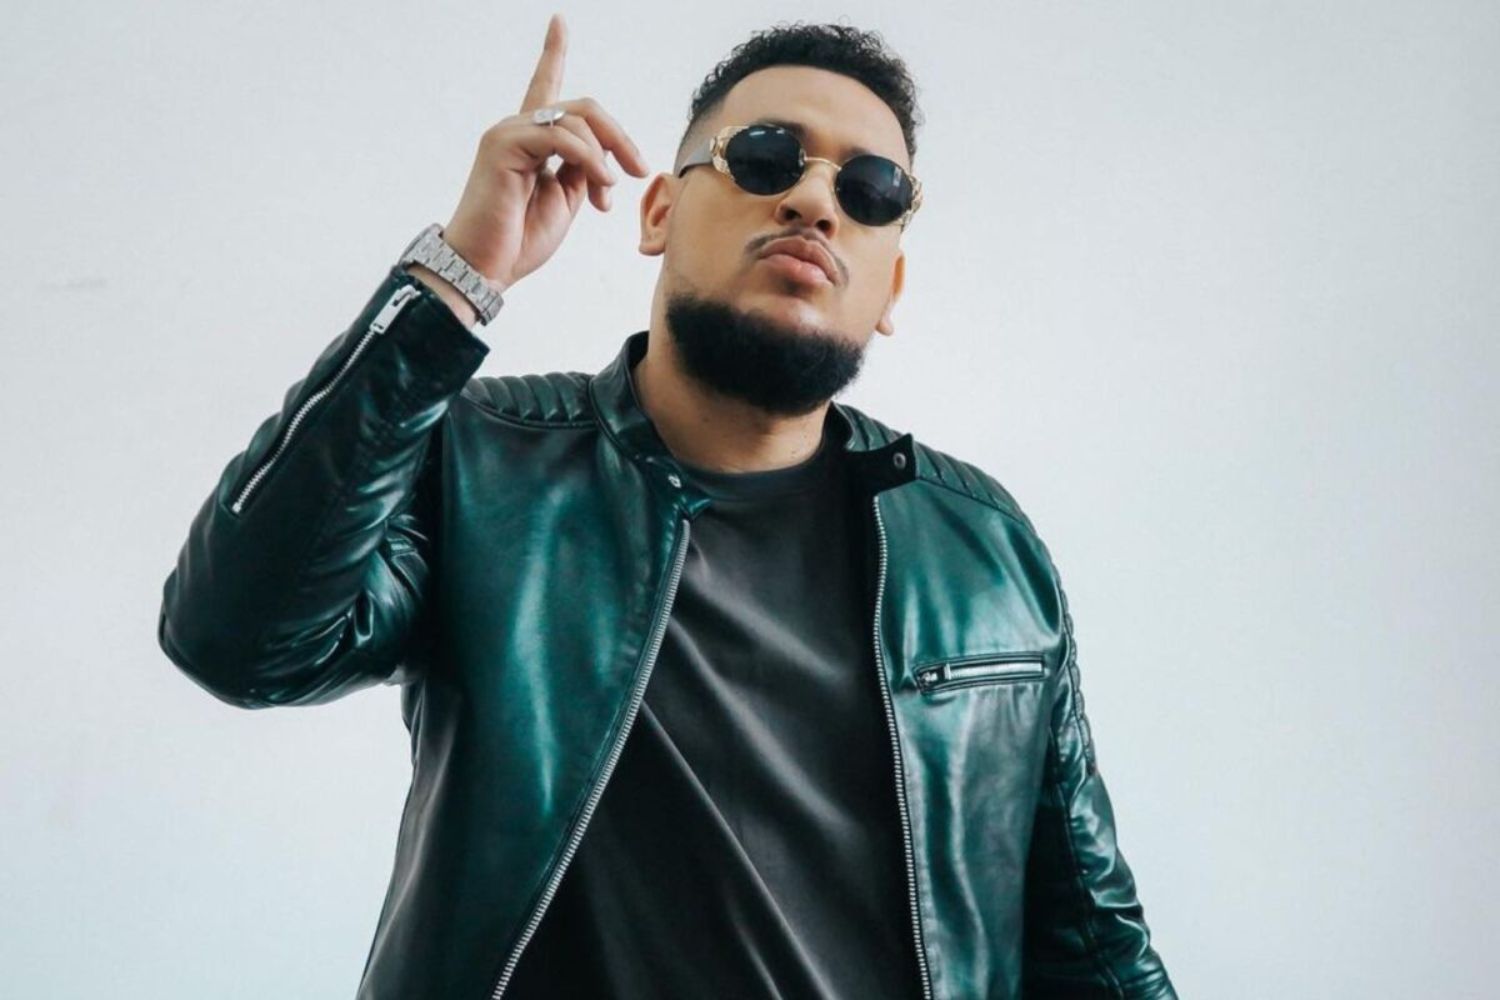 Ongoing reports about AKA's murder suspects misleading and might jeopardise ongoing investigations